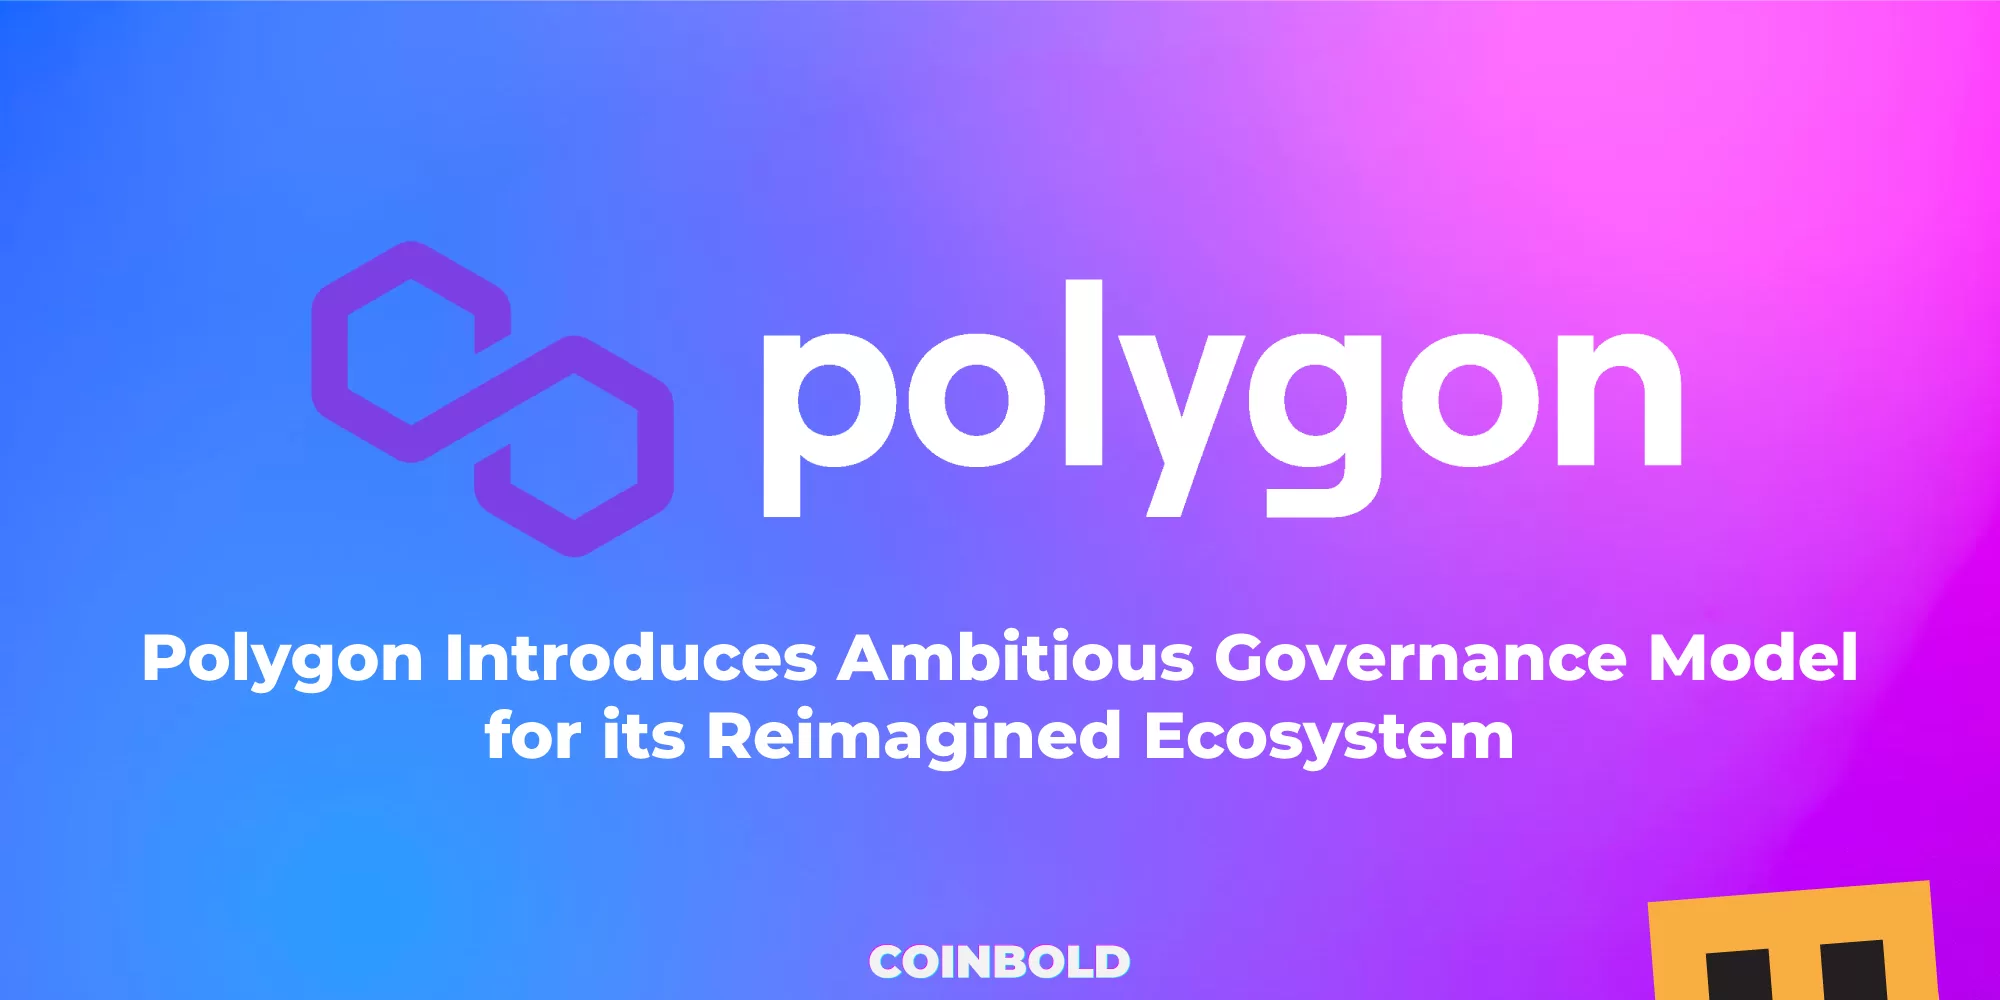 Polygon Introduces Ambitious Governance Model for its Reimagined Ecosystem